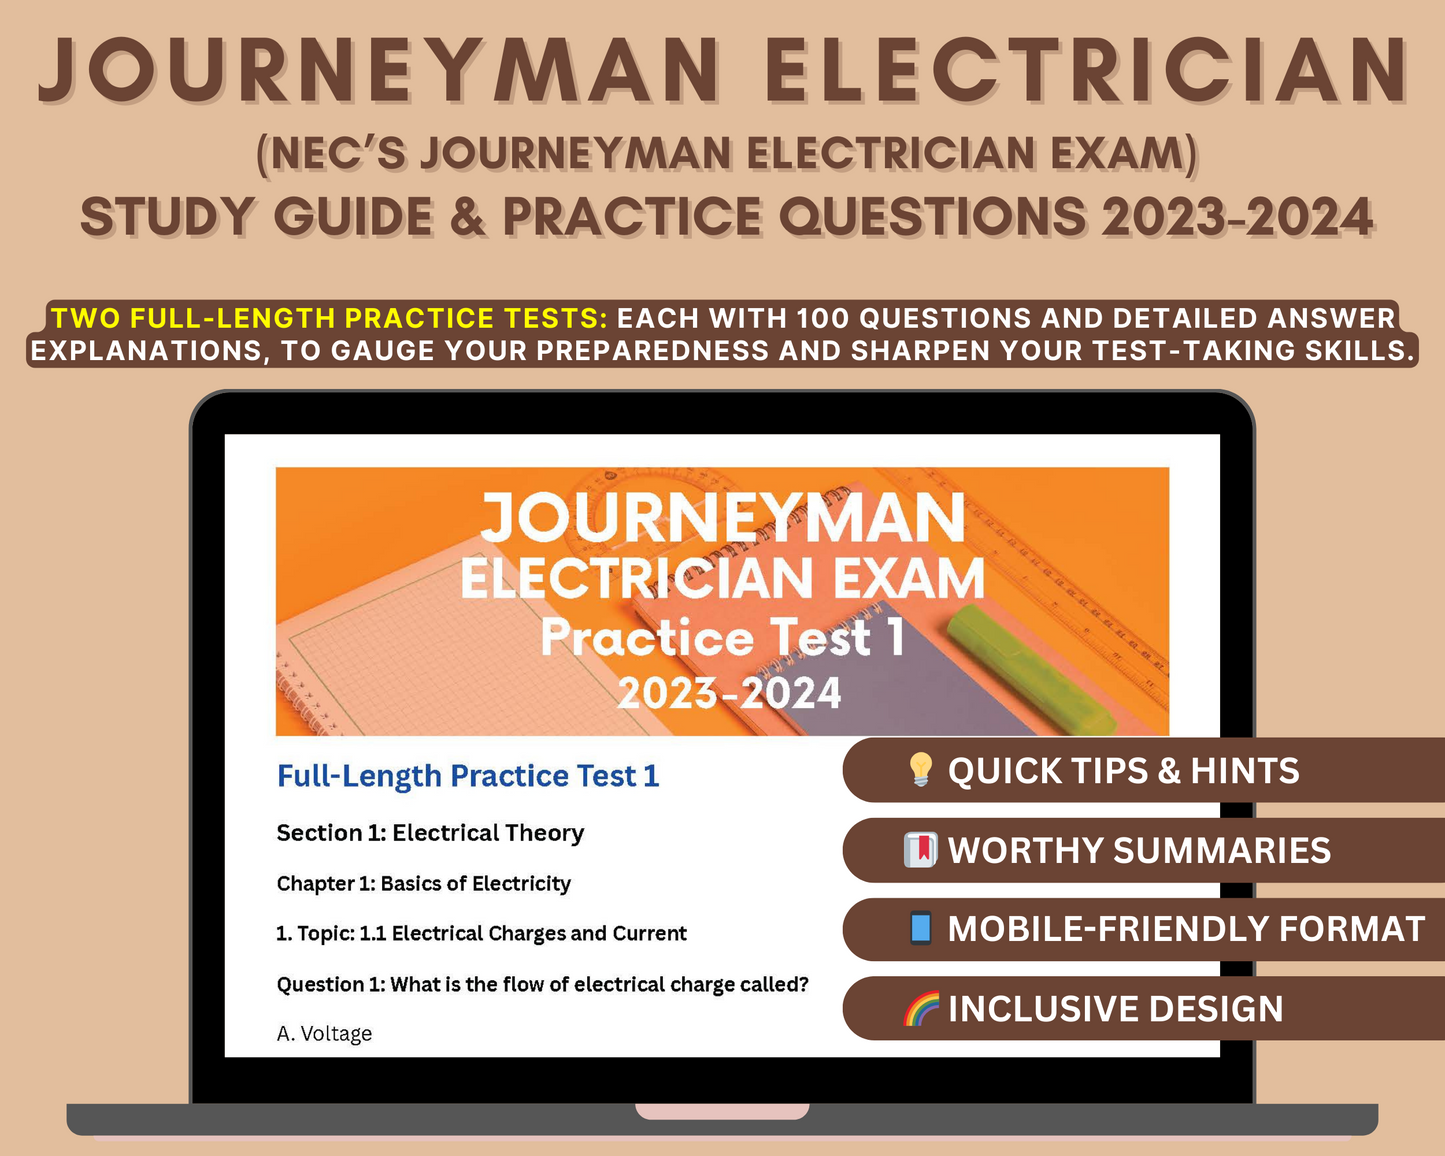 Journeyman Electrician Exam Prep 2023-24: In-Depth Content Review, Practice Tests & Exam Tips for Aspiring Electricians!